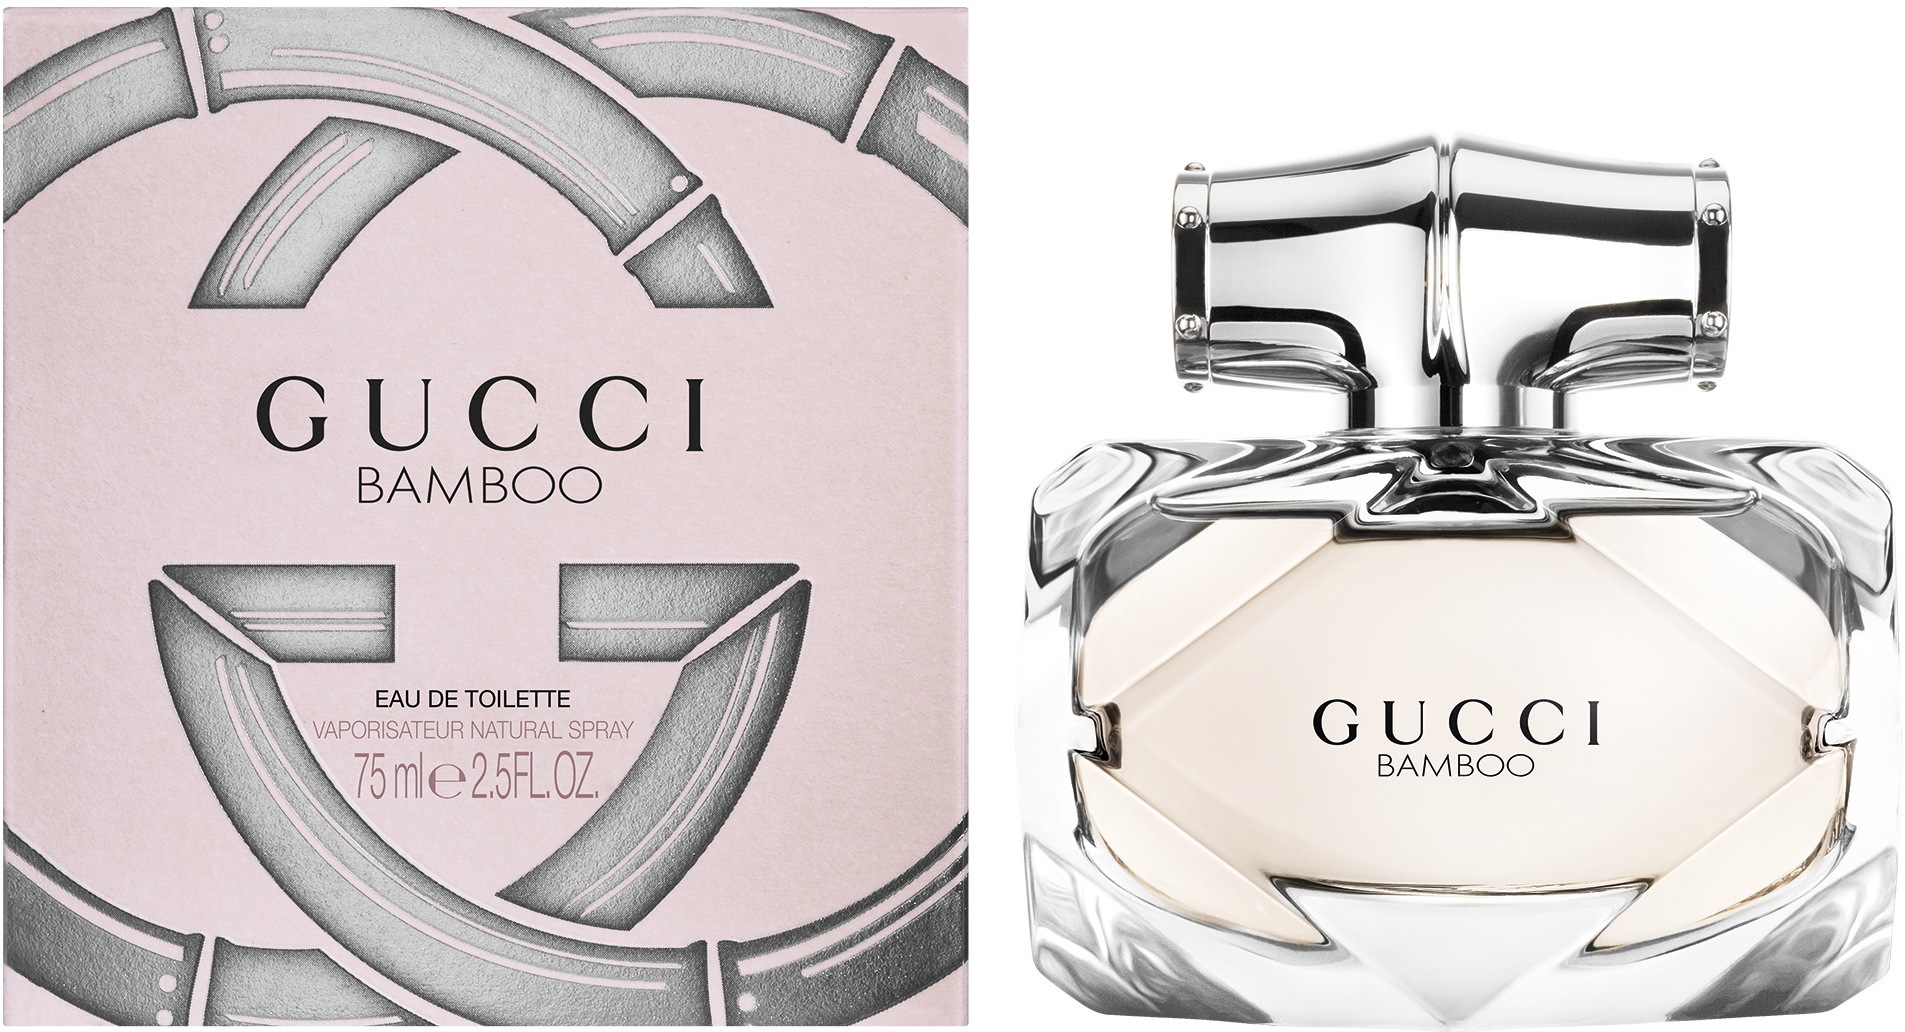 Gucci Bamboo EdT 75ml in duty-free at 